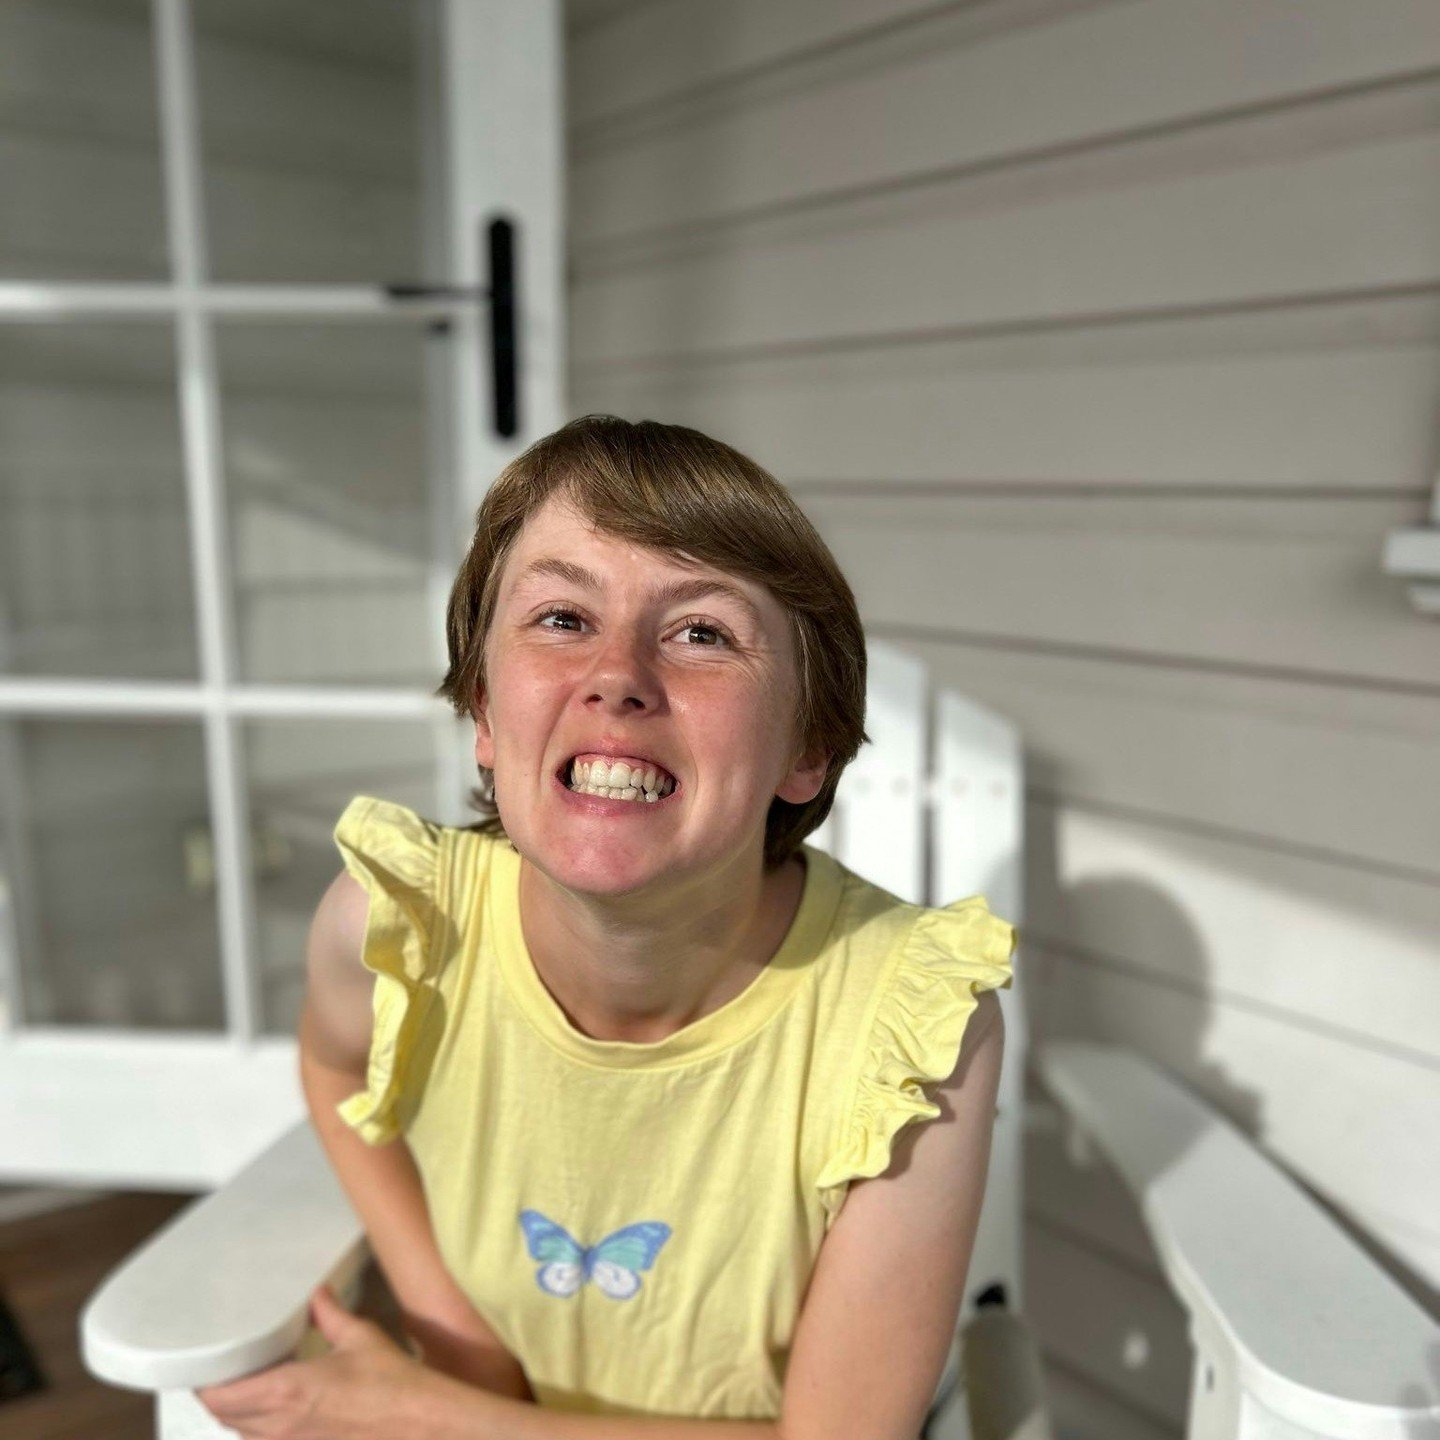 🌟 LYBL Success Stories: Celebrating our GG!

🌼 Georgia: A Ray of Sunshine
Georgia has been with us for almost 2 years, and watching her flourish has been a joy for everyone at LYBL. Her bright and sunny demeanor lights up our days and warms our hea